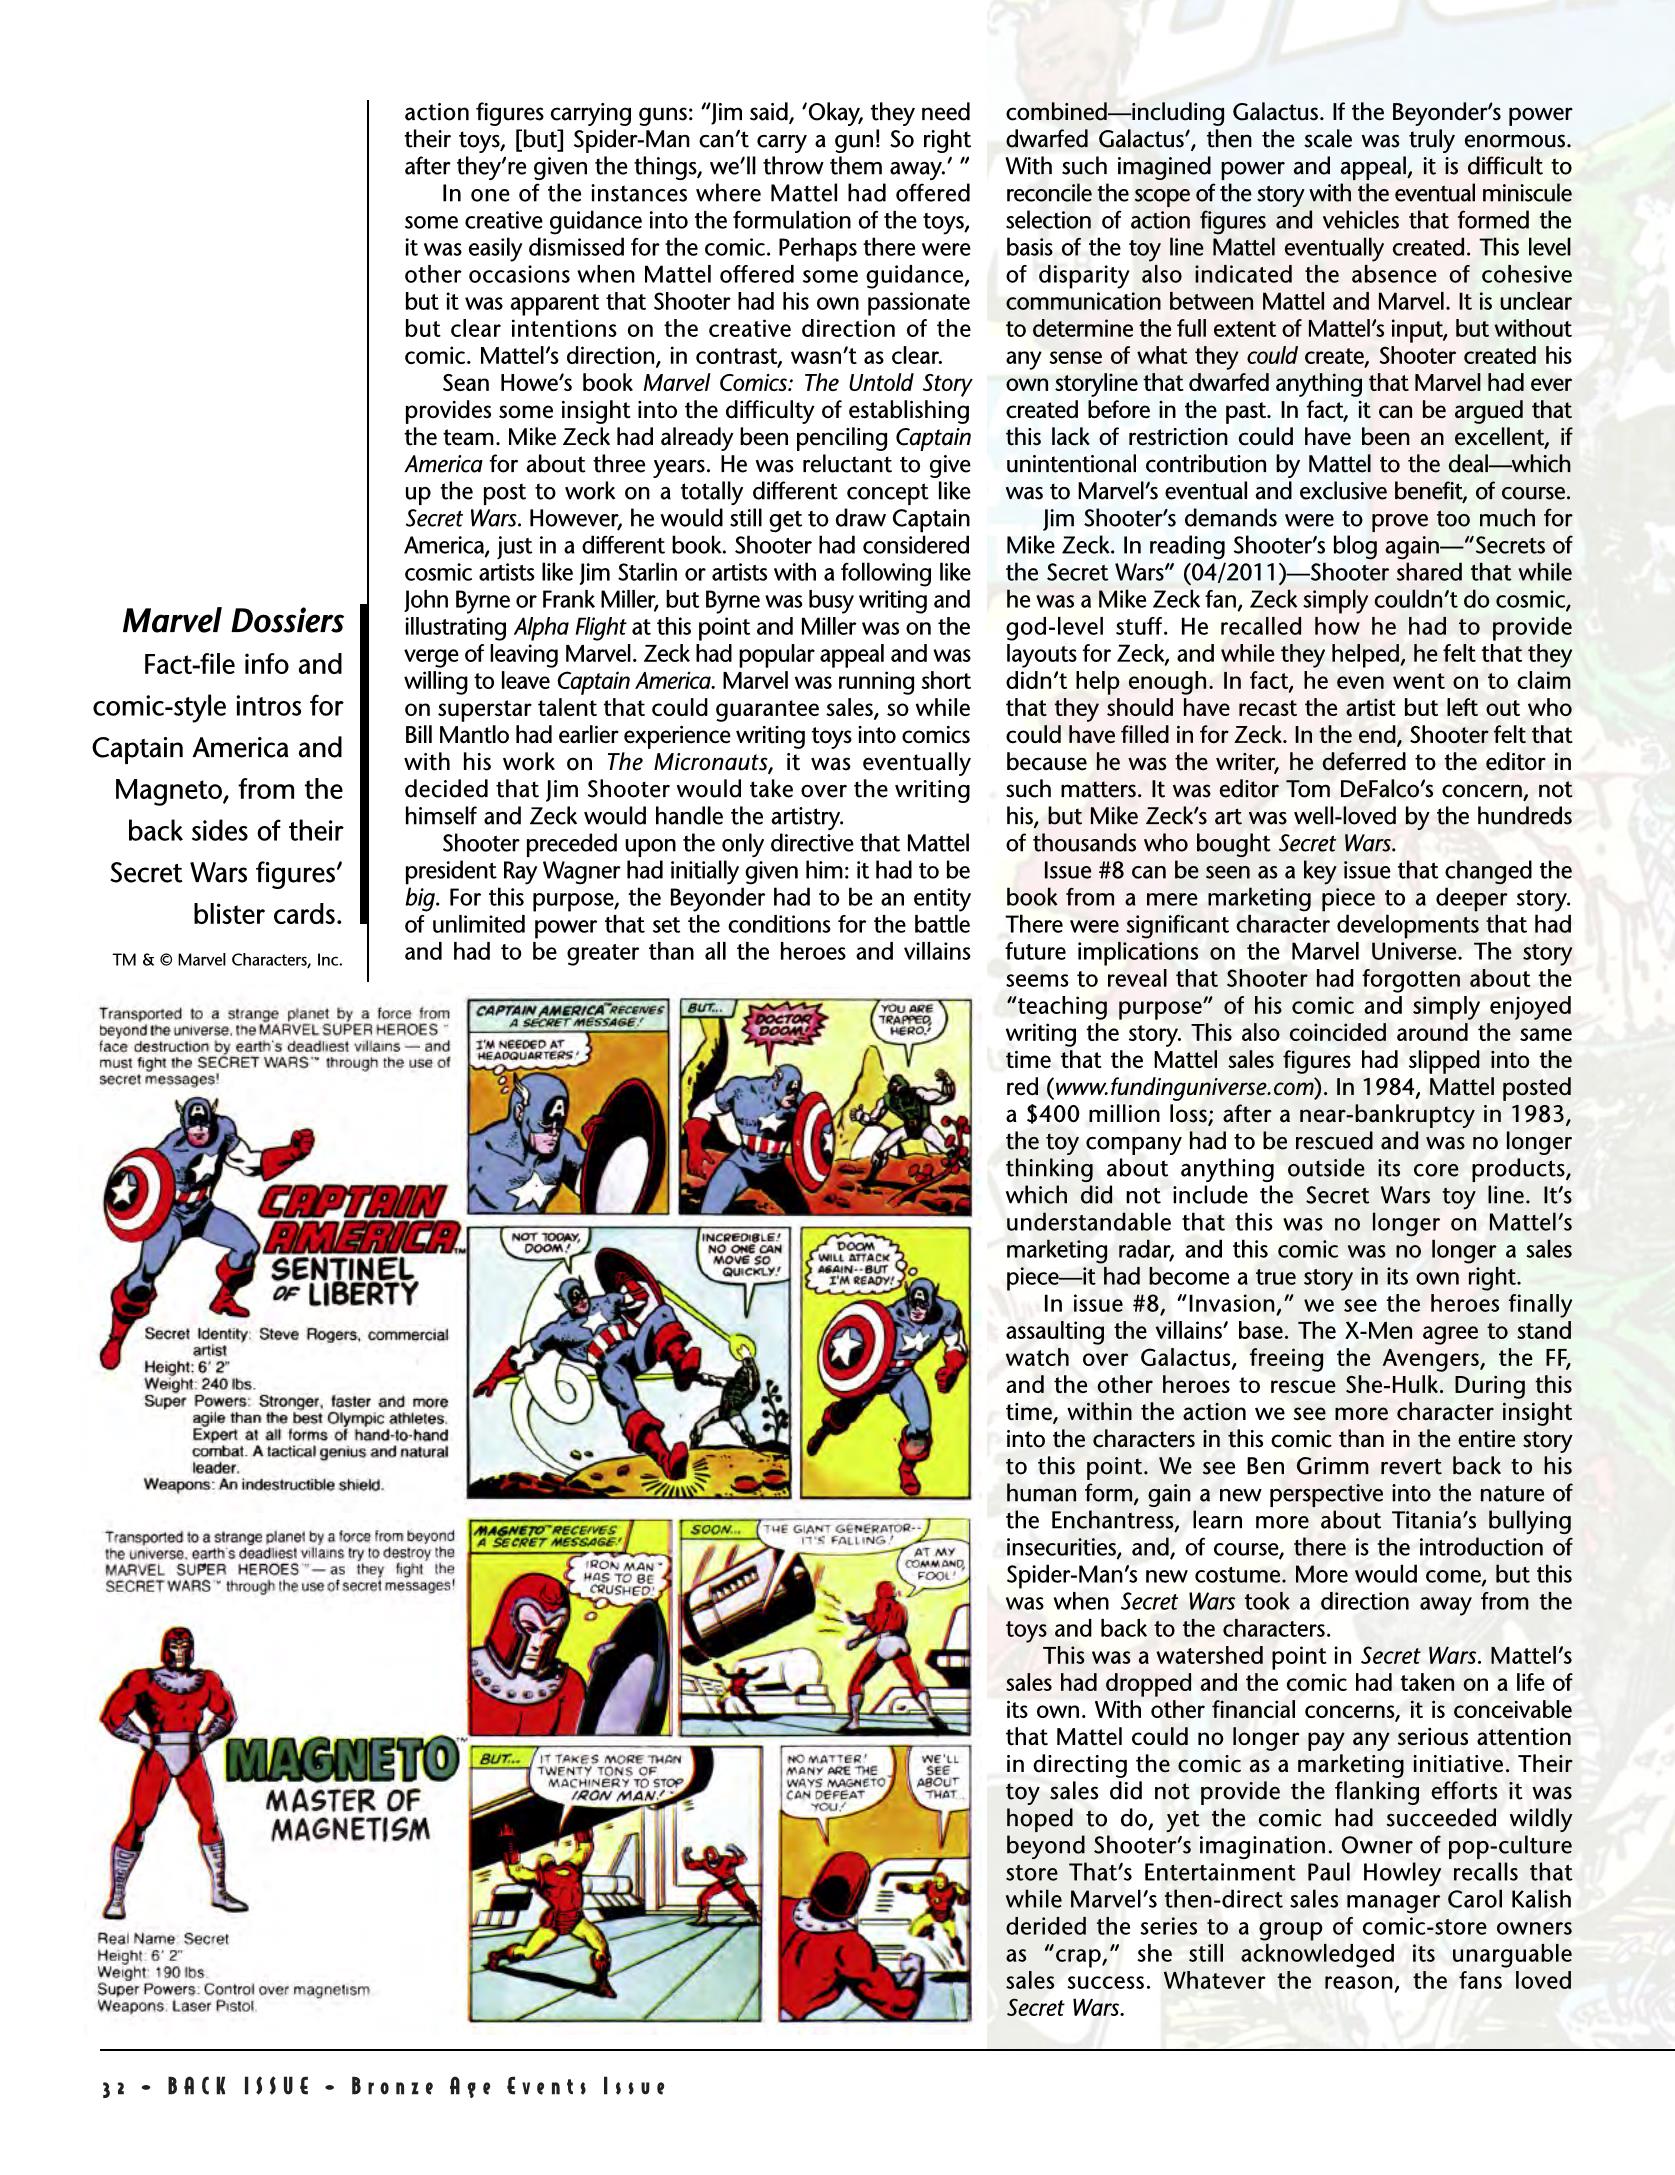 Read online Back Issue comic -  Issue #82 - 34